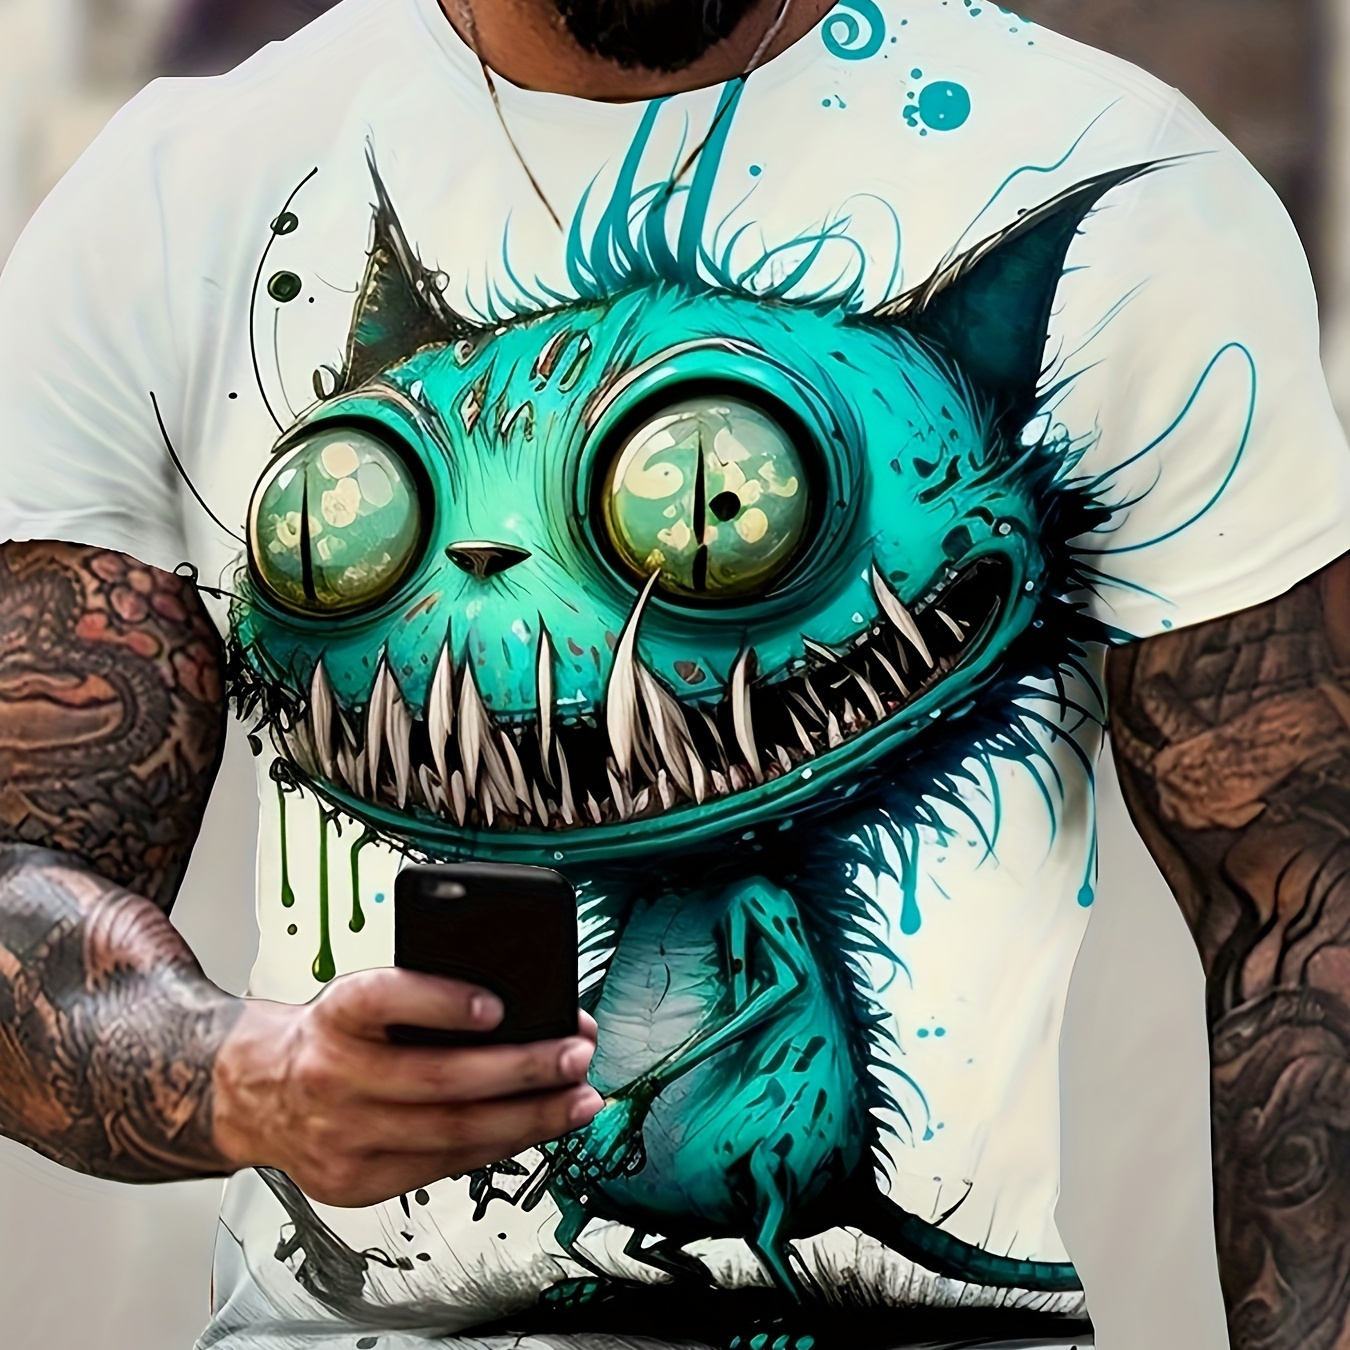 

Cartoon Style Cat Pattern Crew Neck And Short Sleeve T-shirt, Novel And Stylish Tops For Men's Summer Street Wear